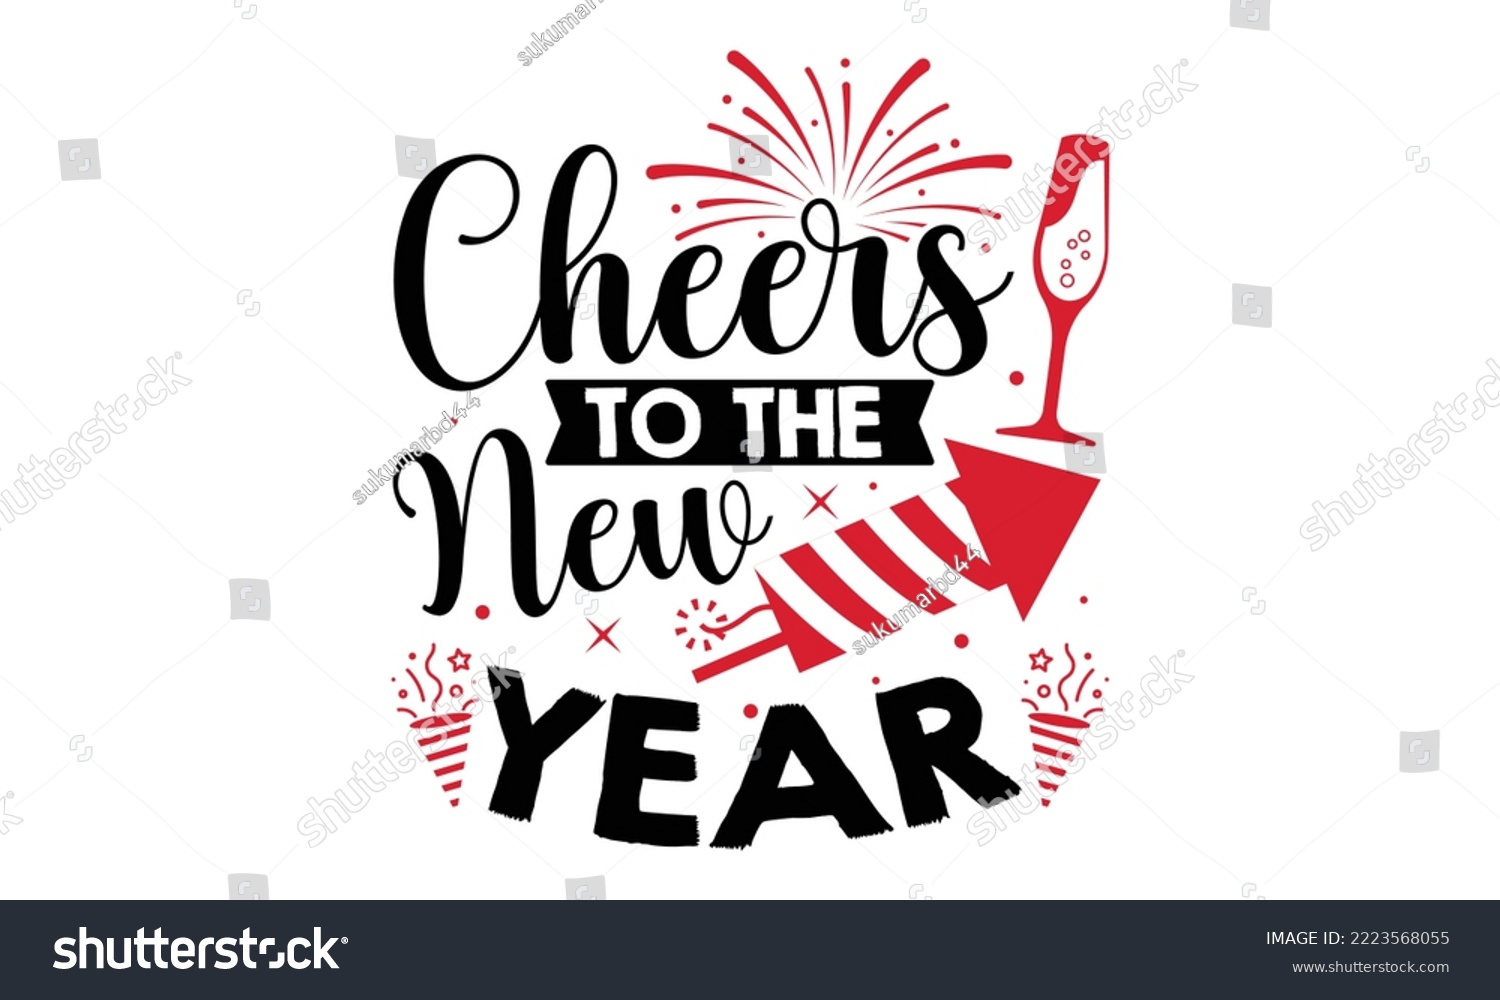 SVG of Cheers To The New Year - Happy New Year SVG Design, Handmade calligraphy vector illustration, Illustration for prints on t-shirt and bags, posters svg